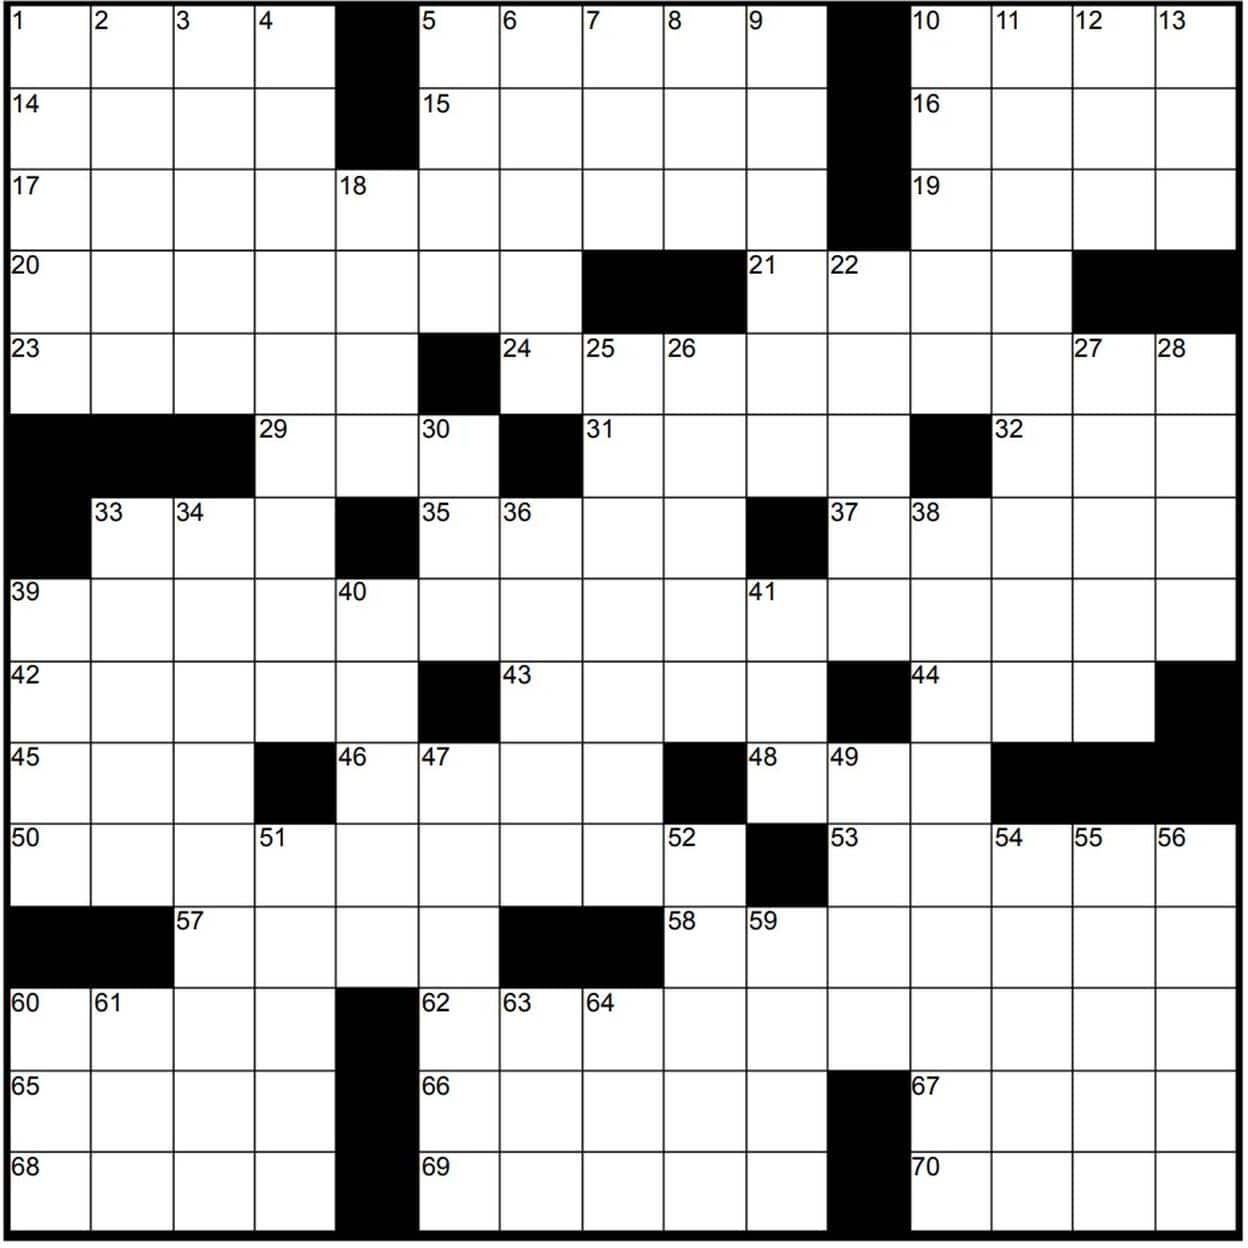 cnn free daily crossword puzzle